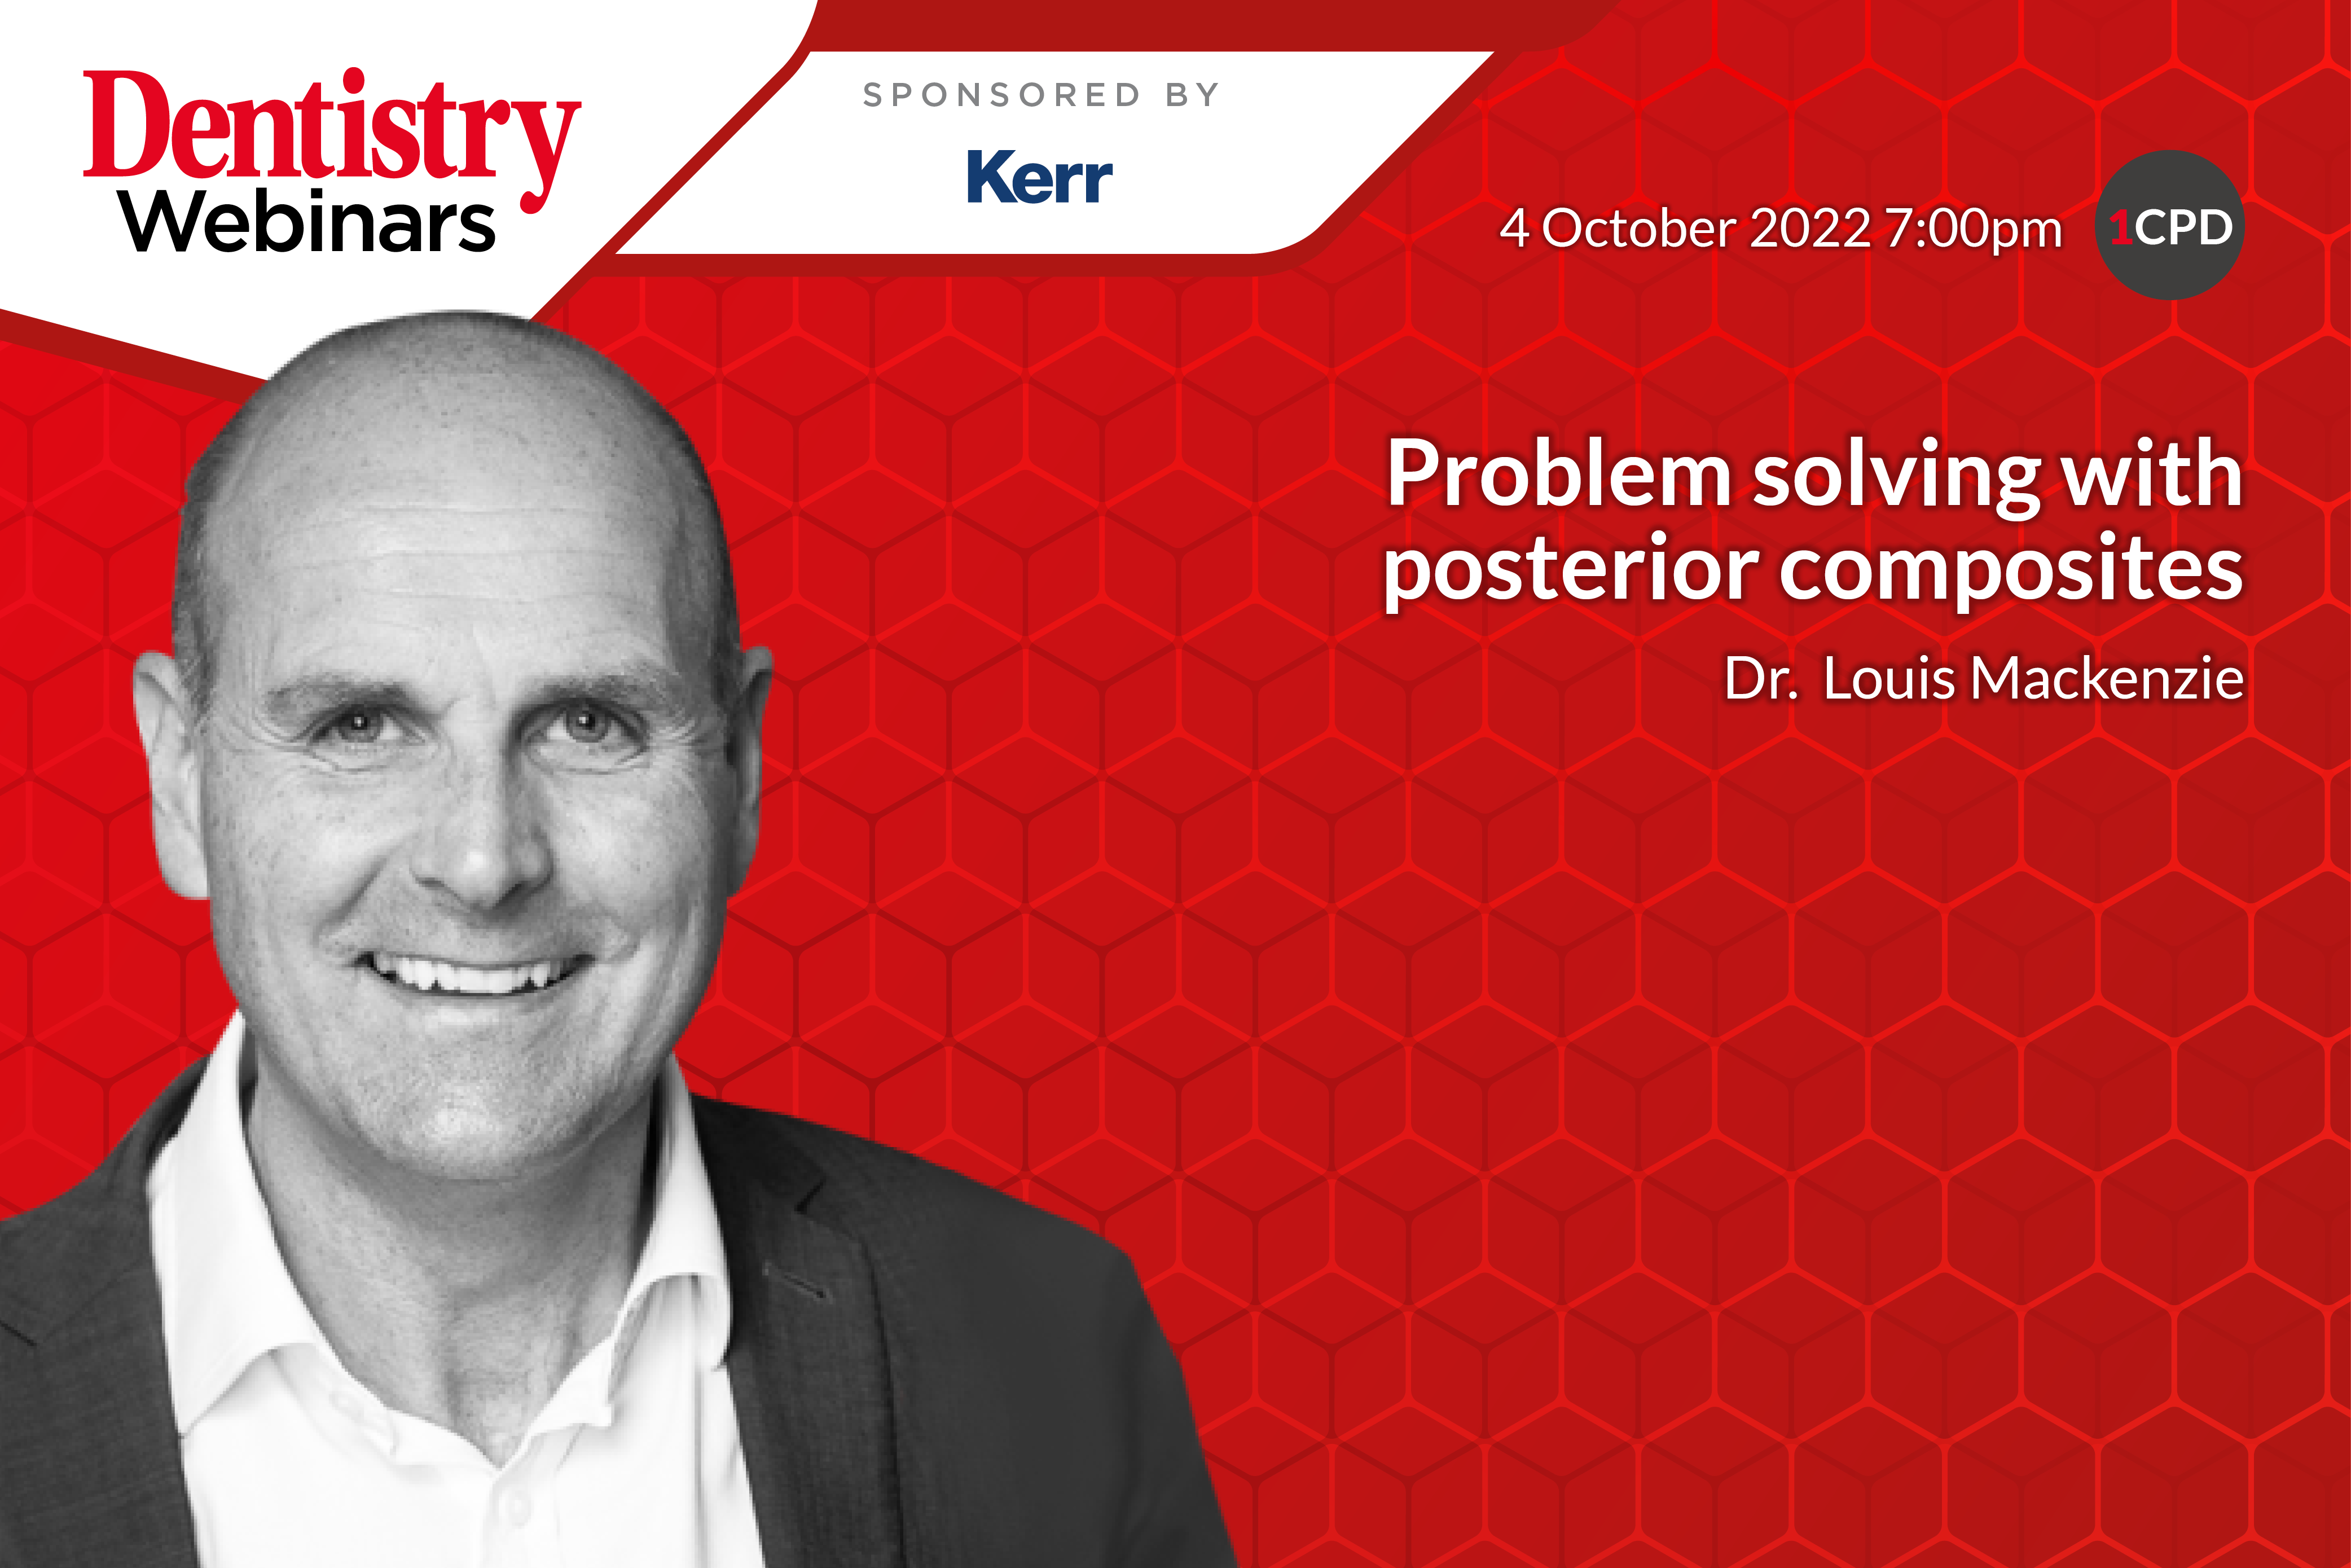 Join Louis Mackenzie on Tuesday 4 October 2022 as he discusses problem solving with posterior composites – sign up now. 